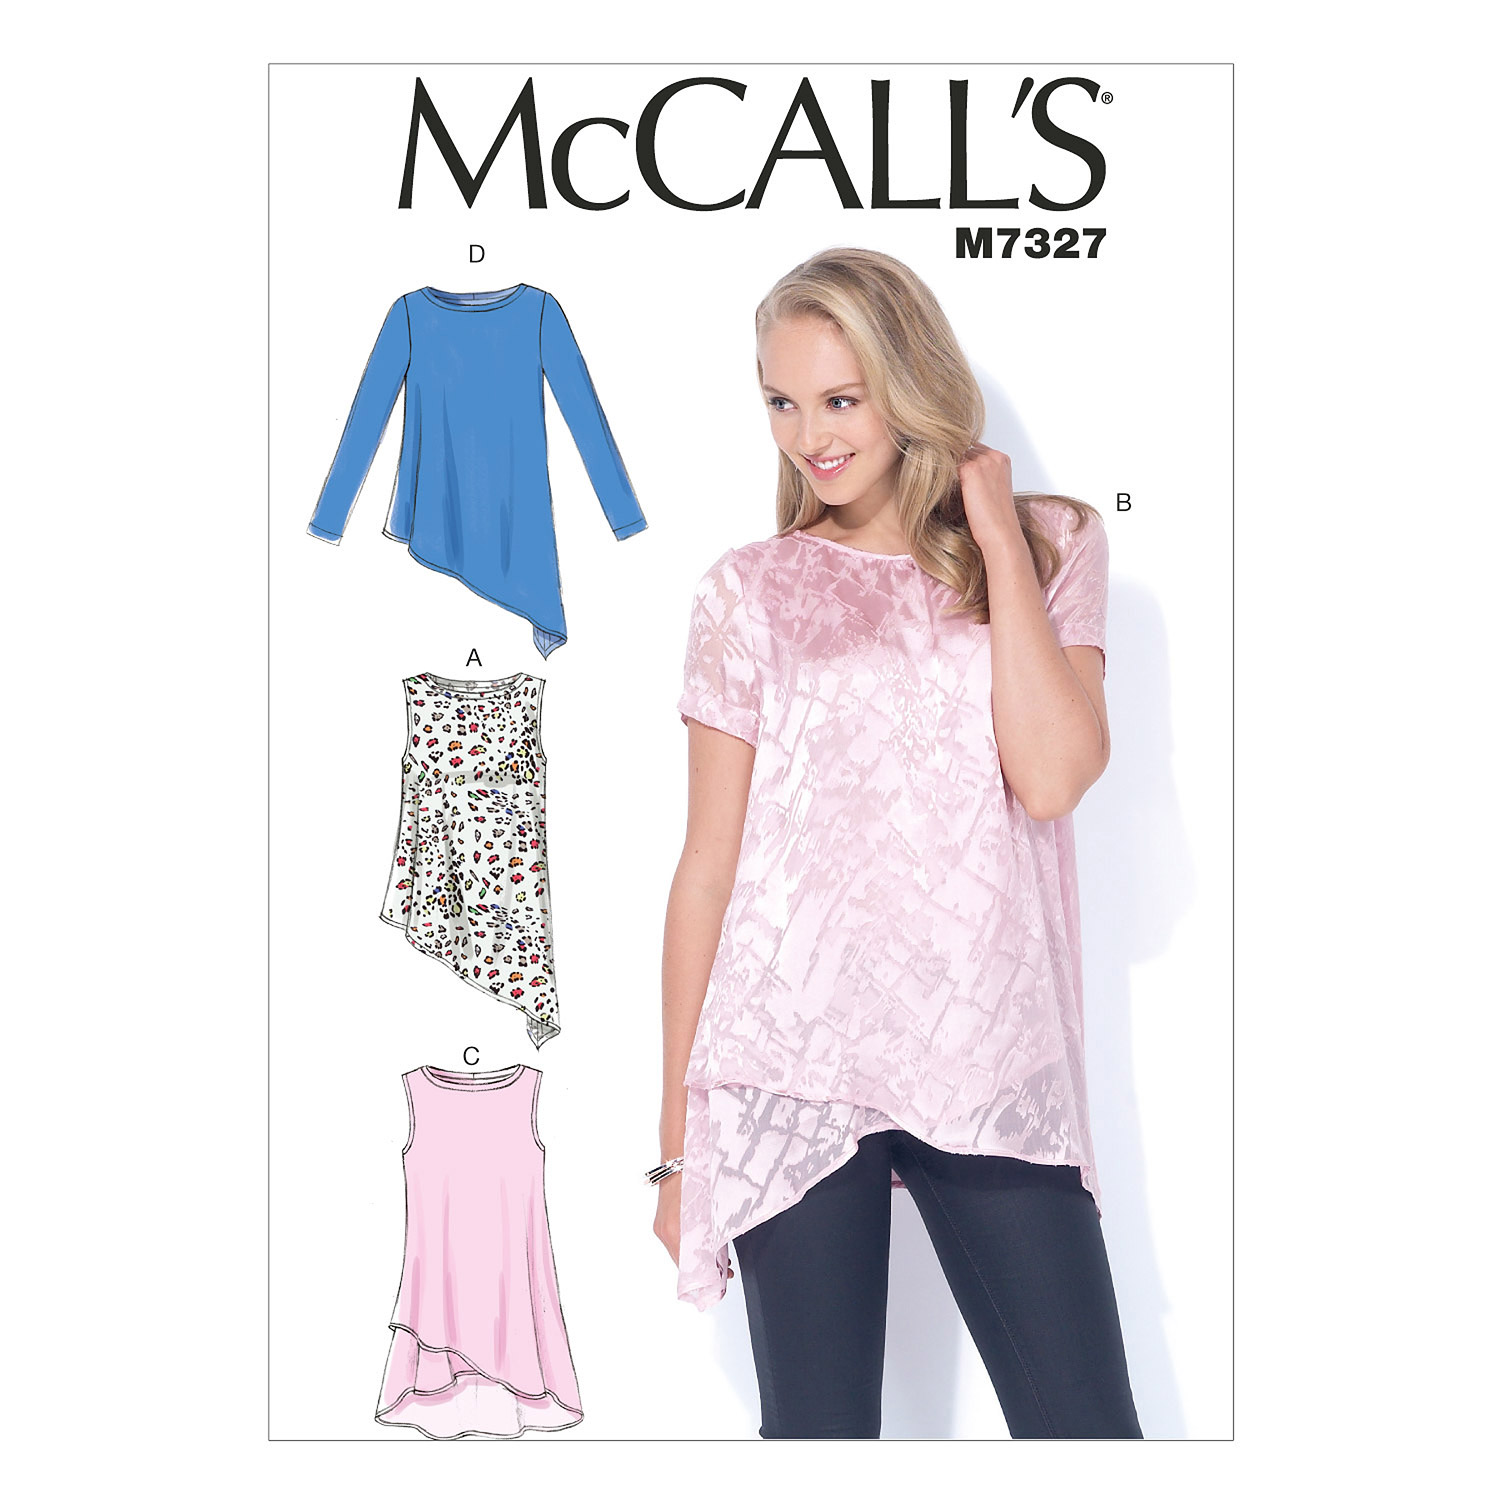 McCalls Tops M7327 - The Fold Line